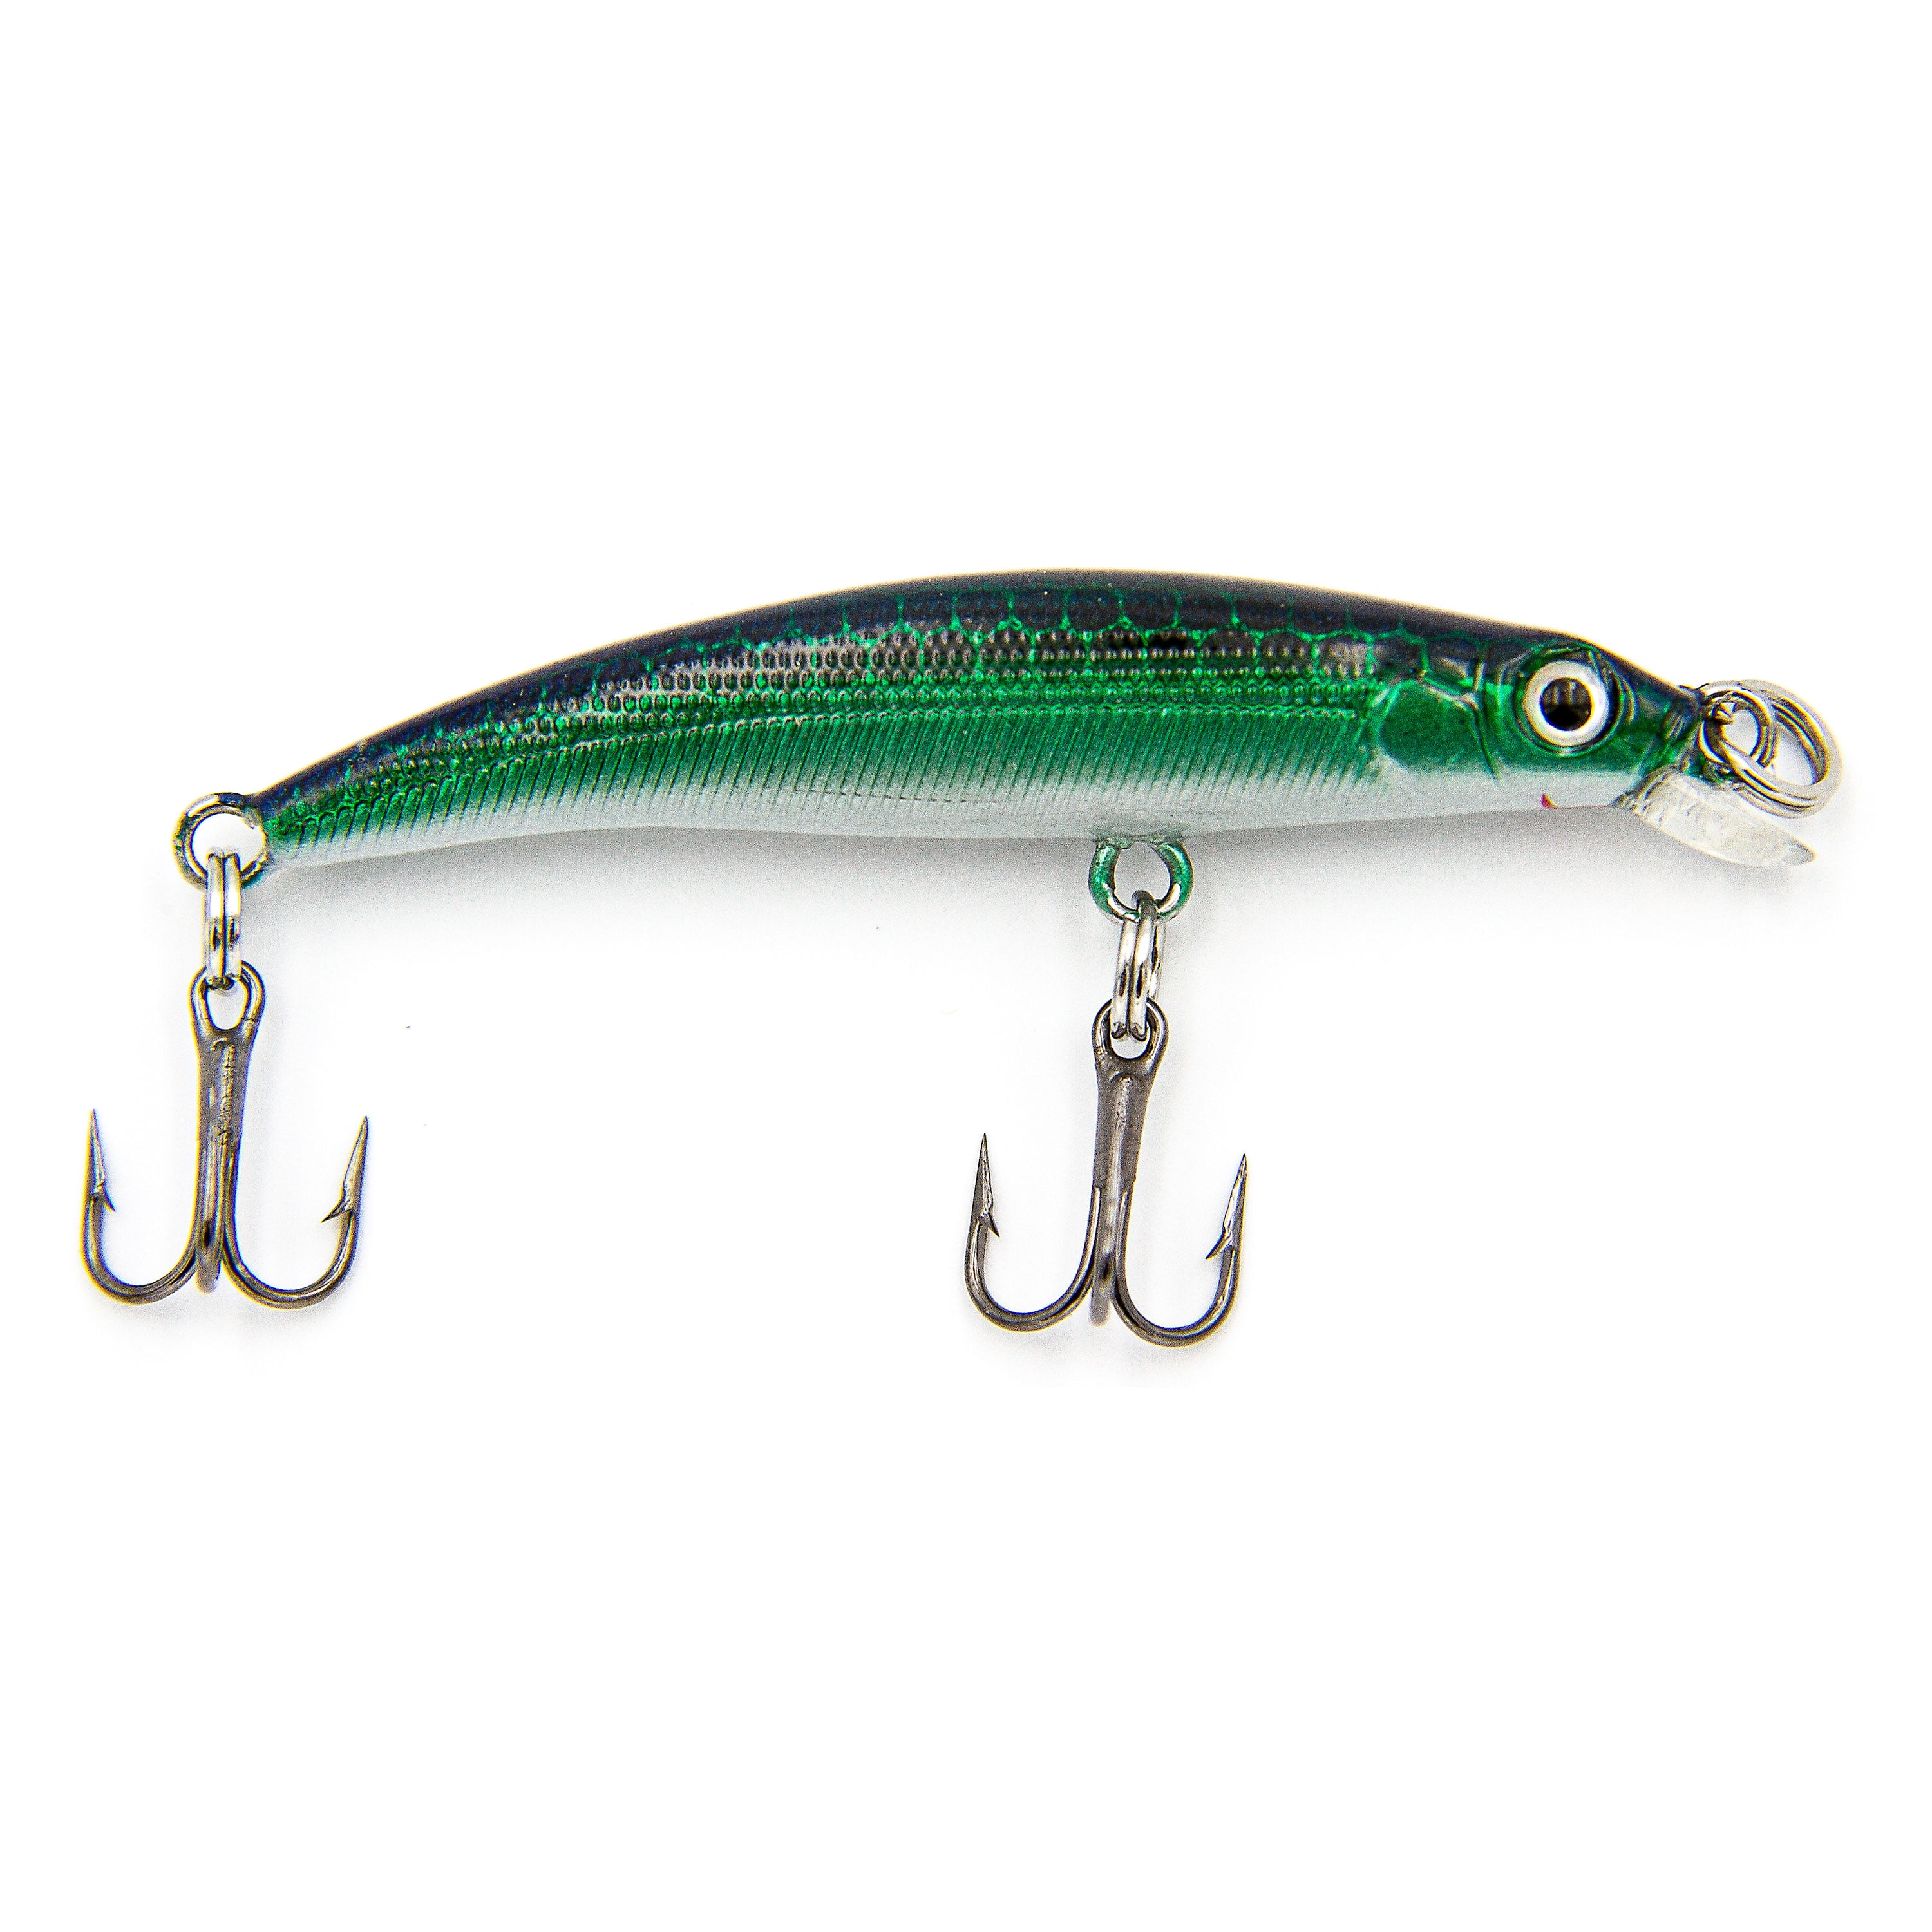 Fishing Lures for sale in Madison, Wisconsin